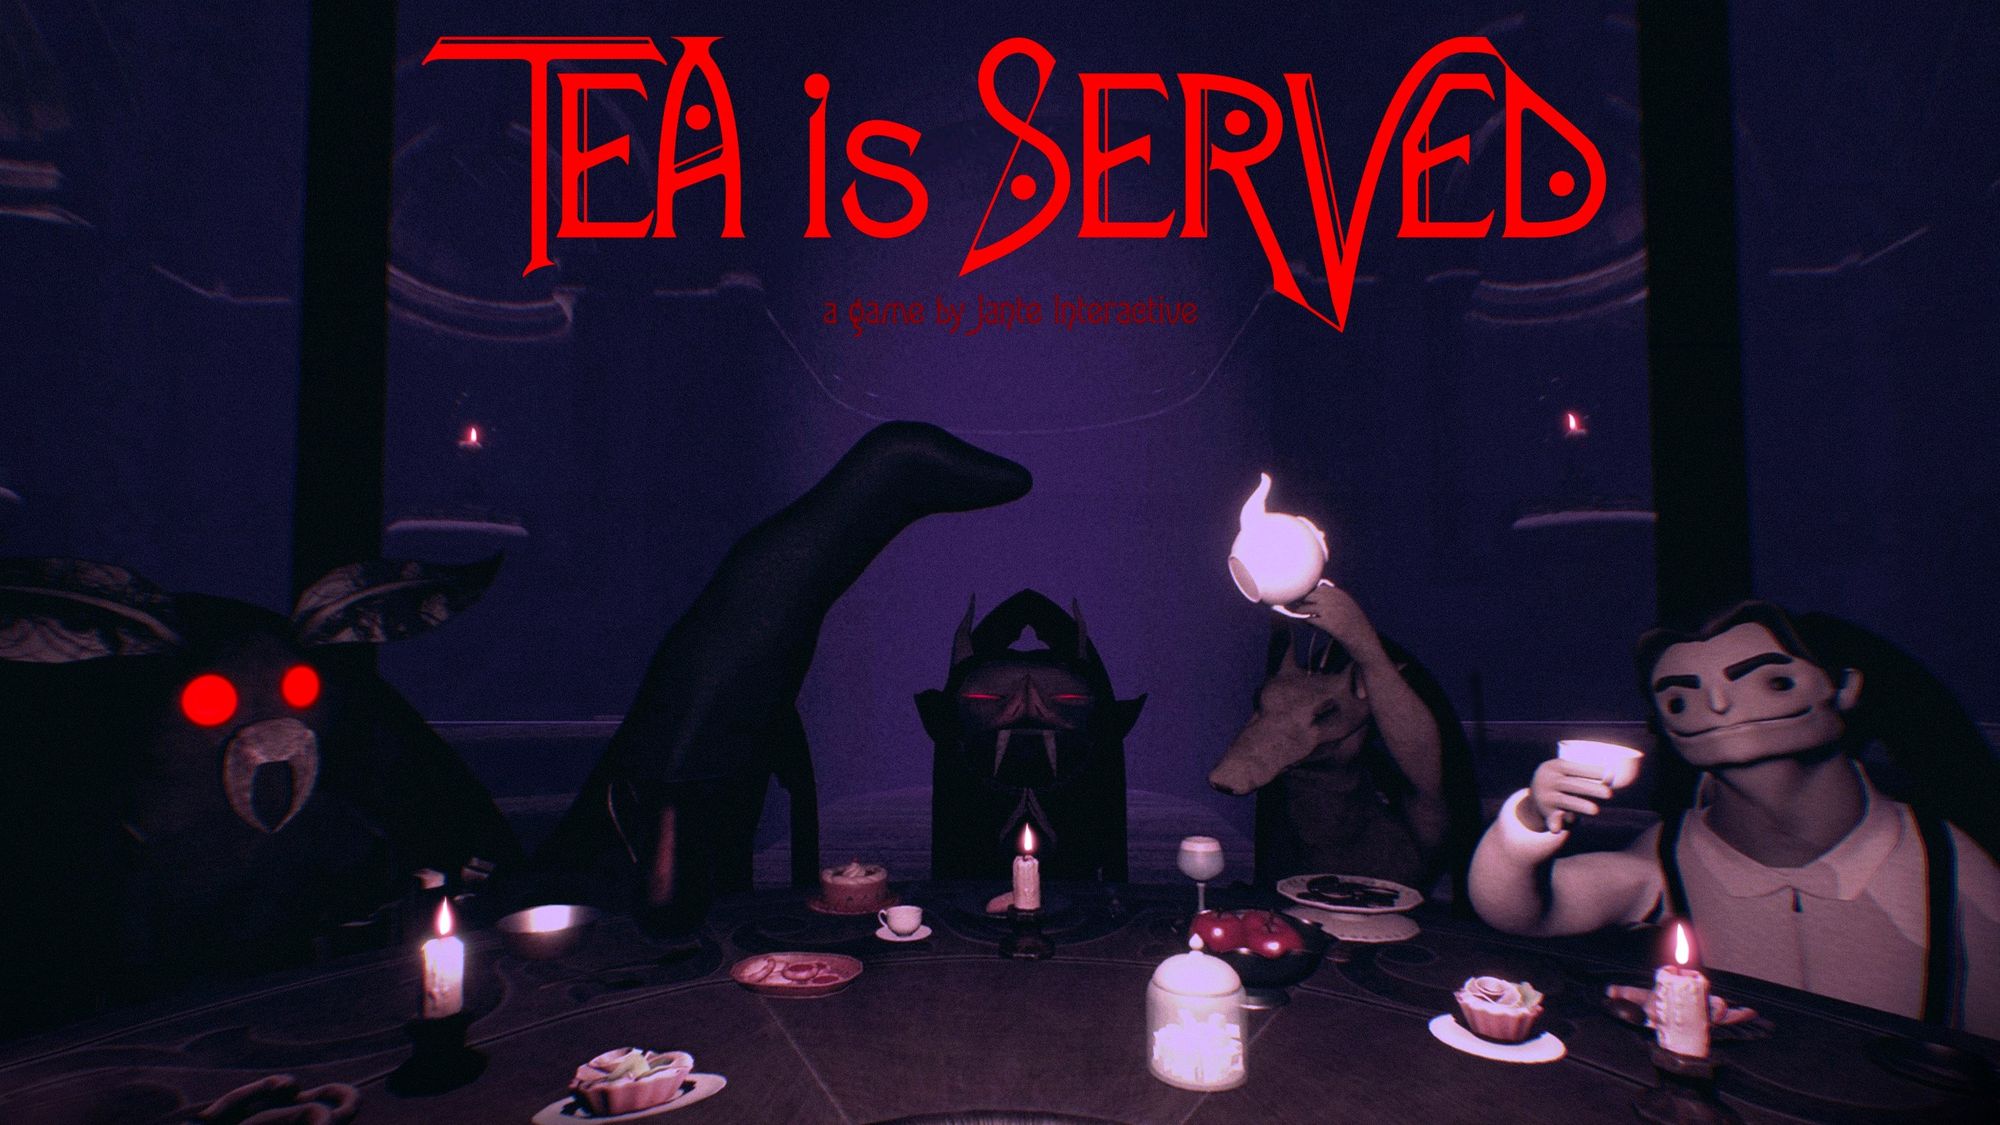 Tea Is Served Entertains Cryptids In A VR Comedy Horror